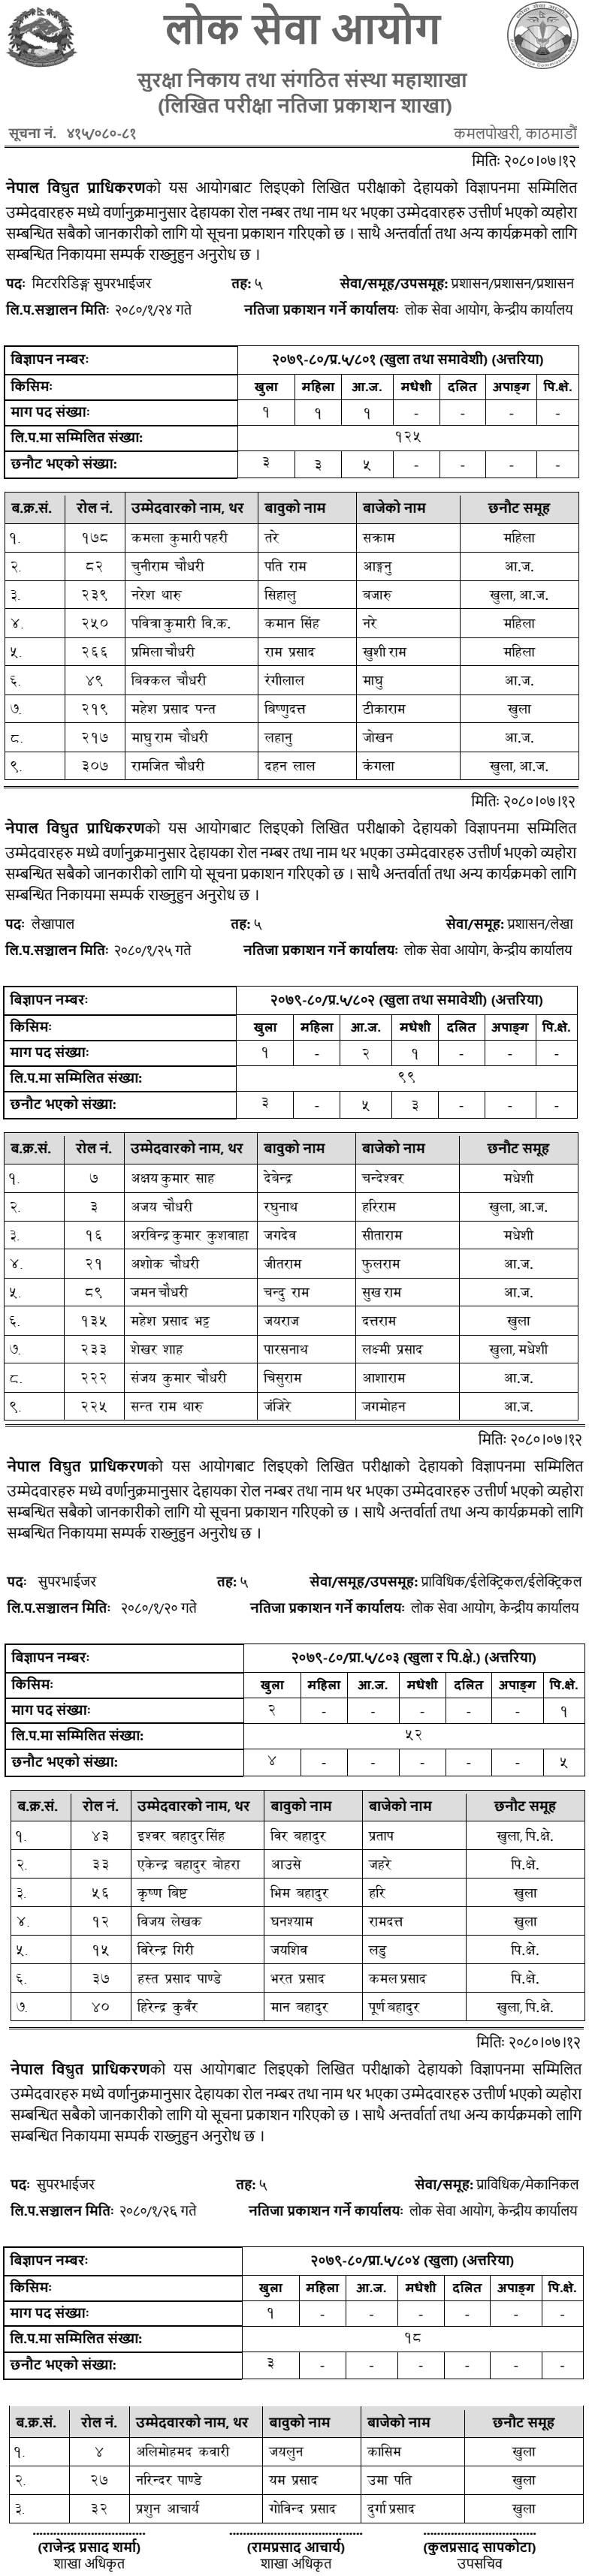 NEA Nepal Electricity Authority Exam Results of 5th Level Assistant